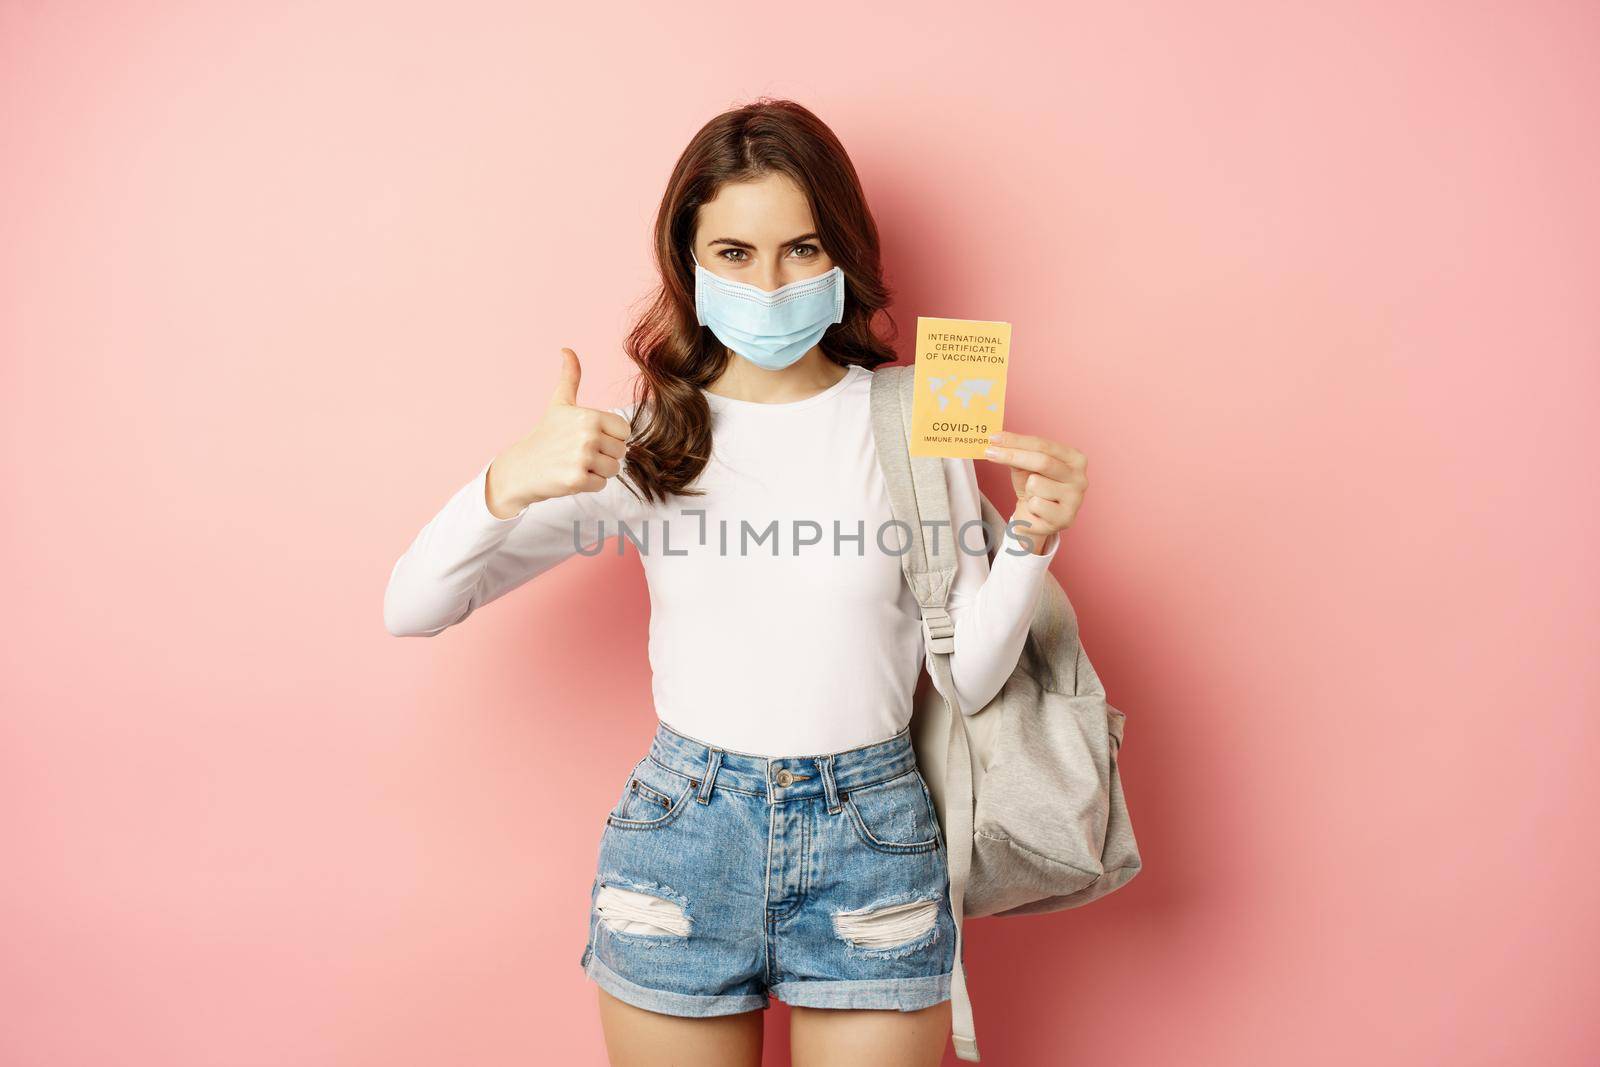 Young woman in medical mask, showing thumbs up and covid vaccination certificate, travel during pandemic, going on holiday, standing over pink background.